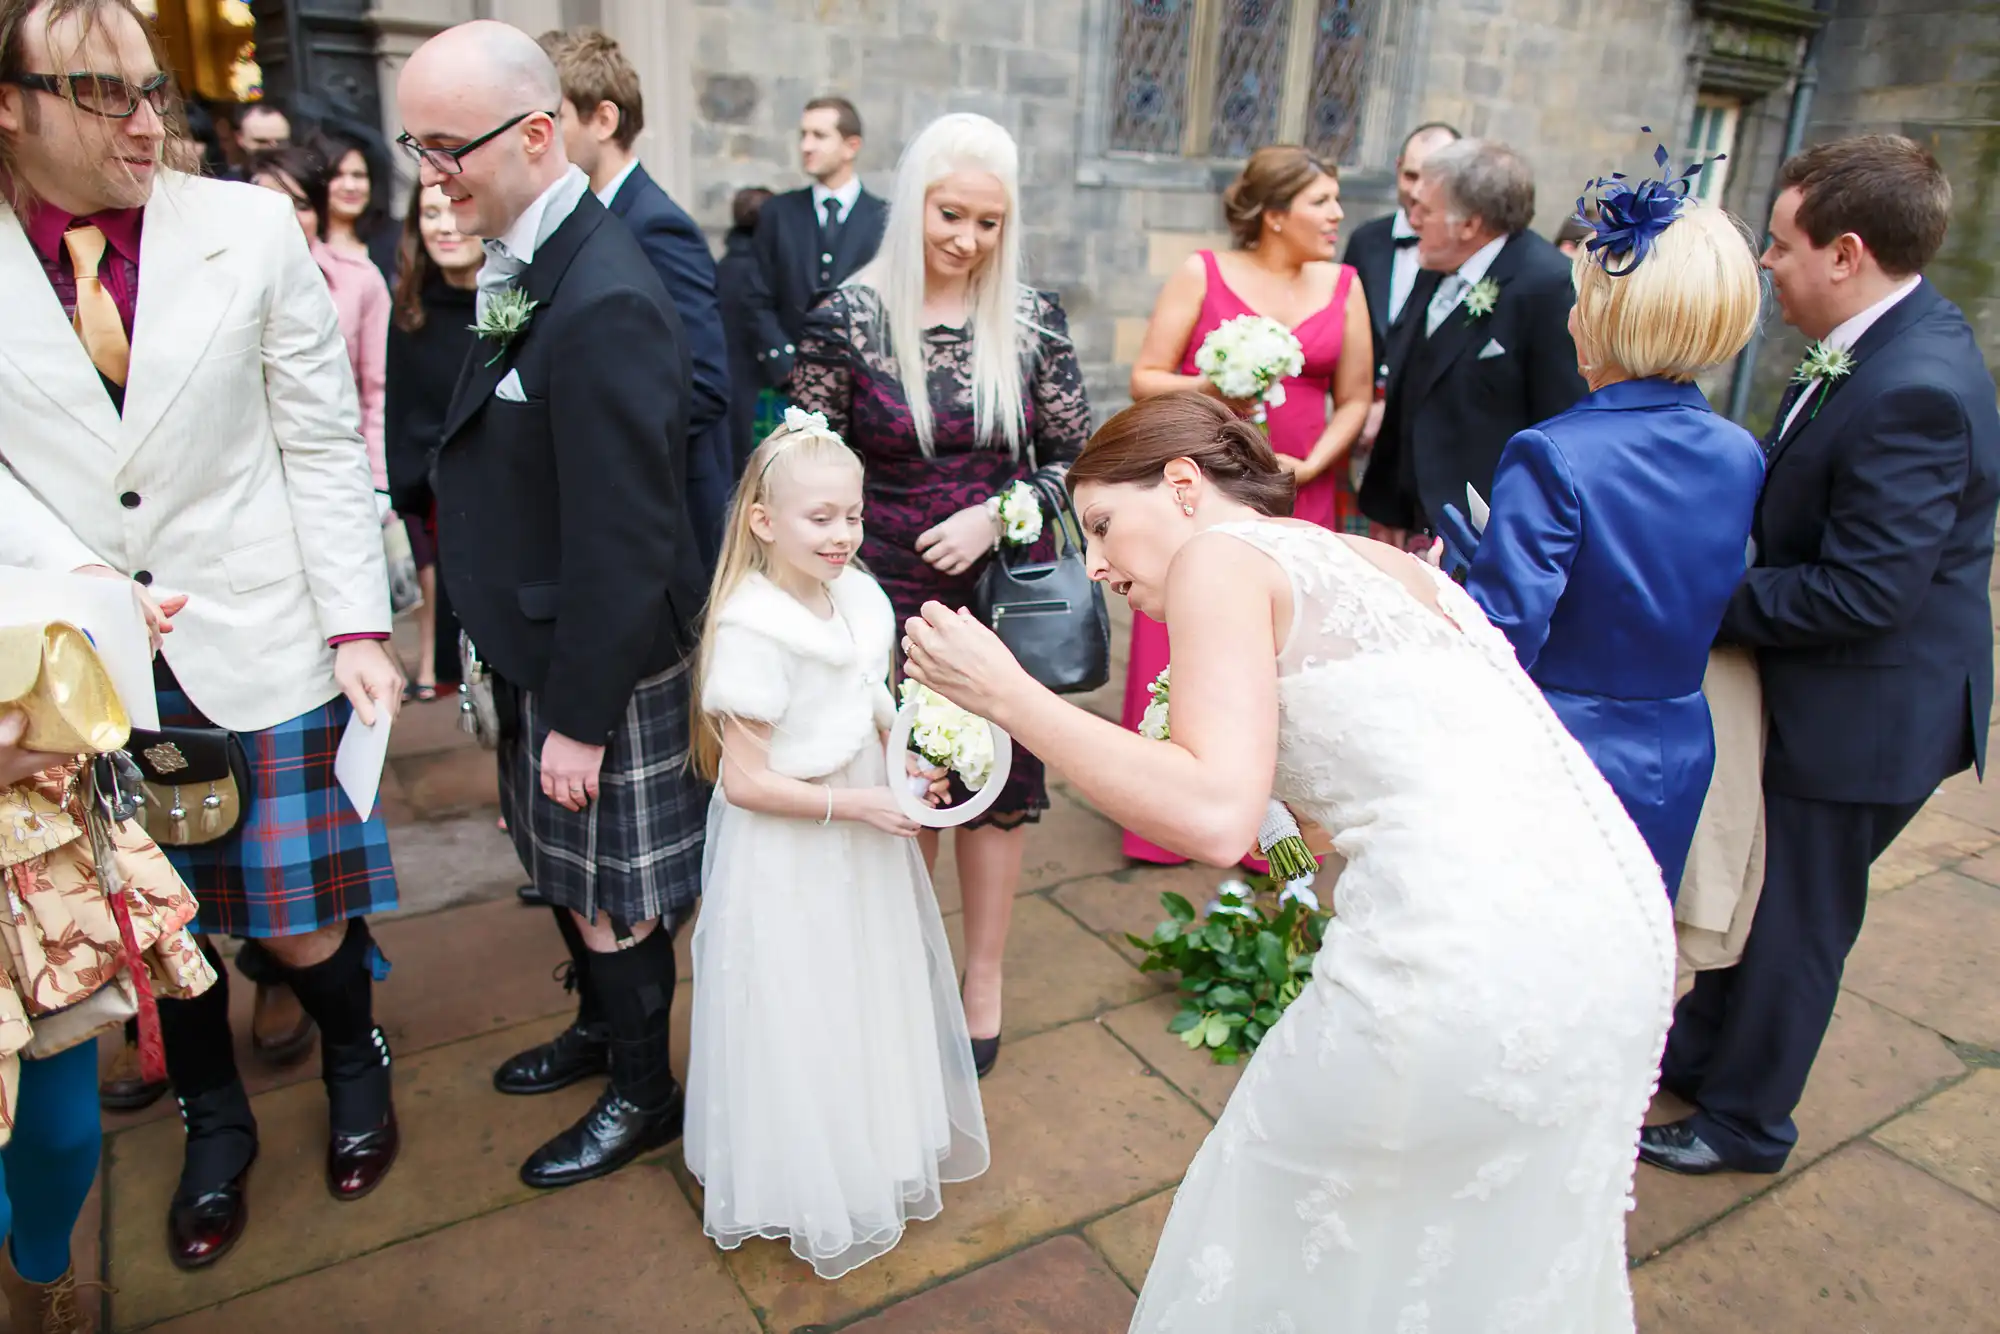 A bride in a white dress kneels to speak with a young girl holding a flower basket at a wedding ceremony, surrounded by guests in various formal attires.